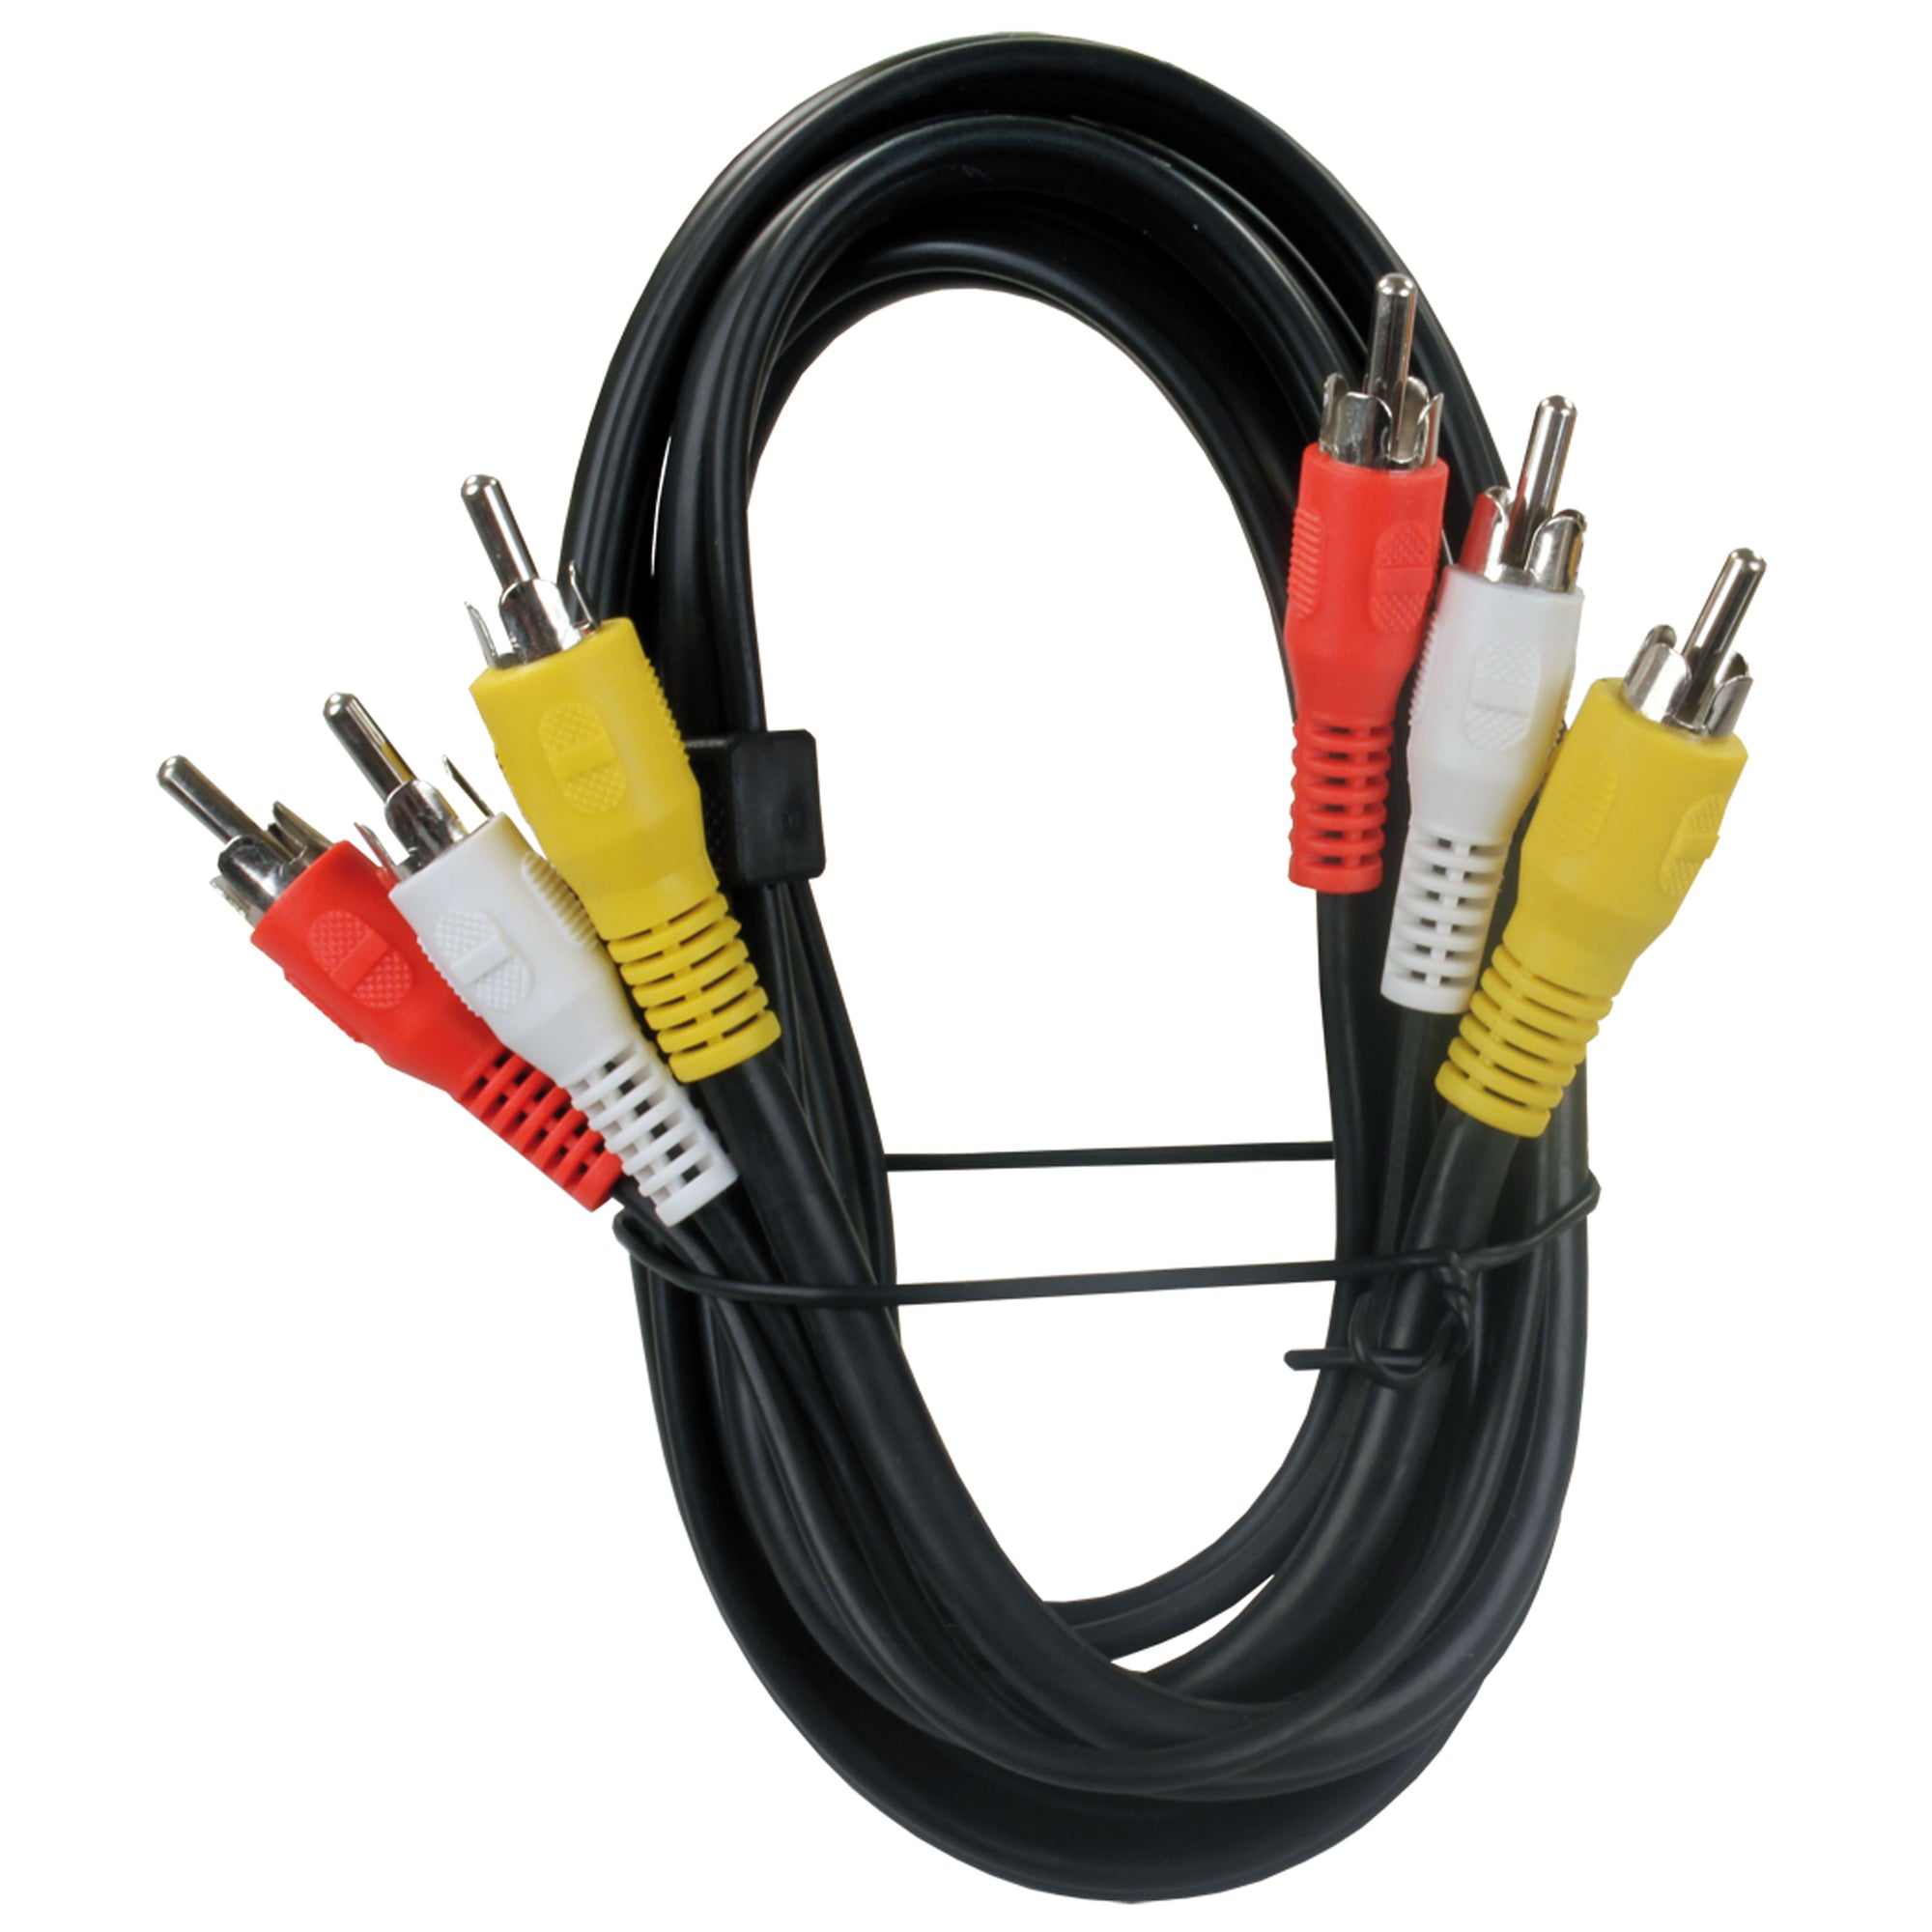 JR Products 47935 RCA/AV Tri-Cable Jumper - 6'